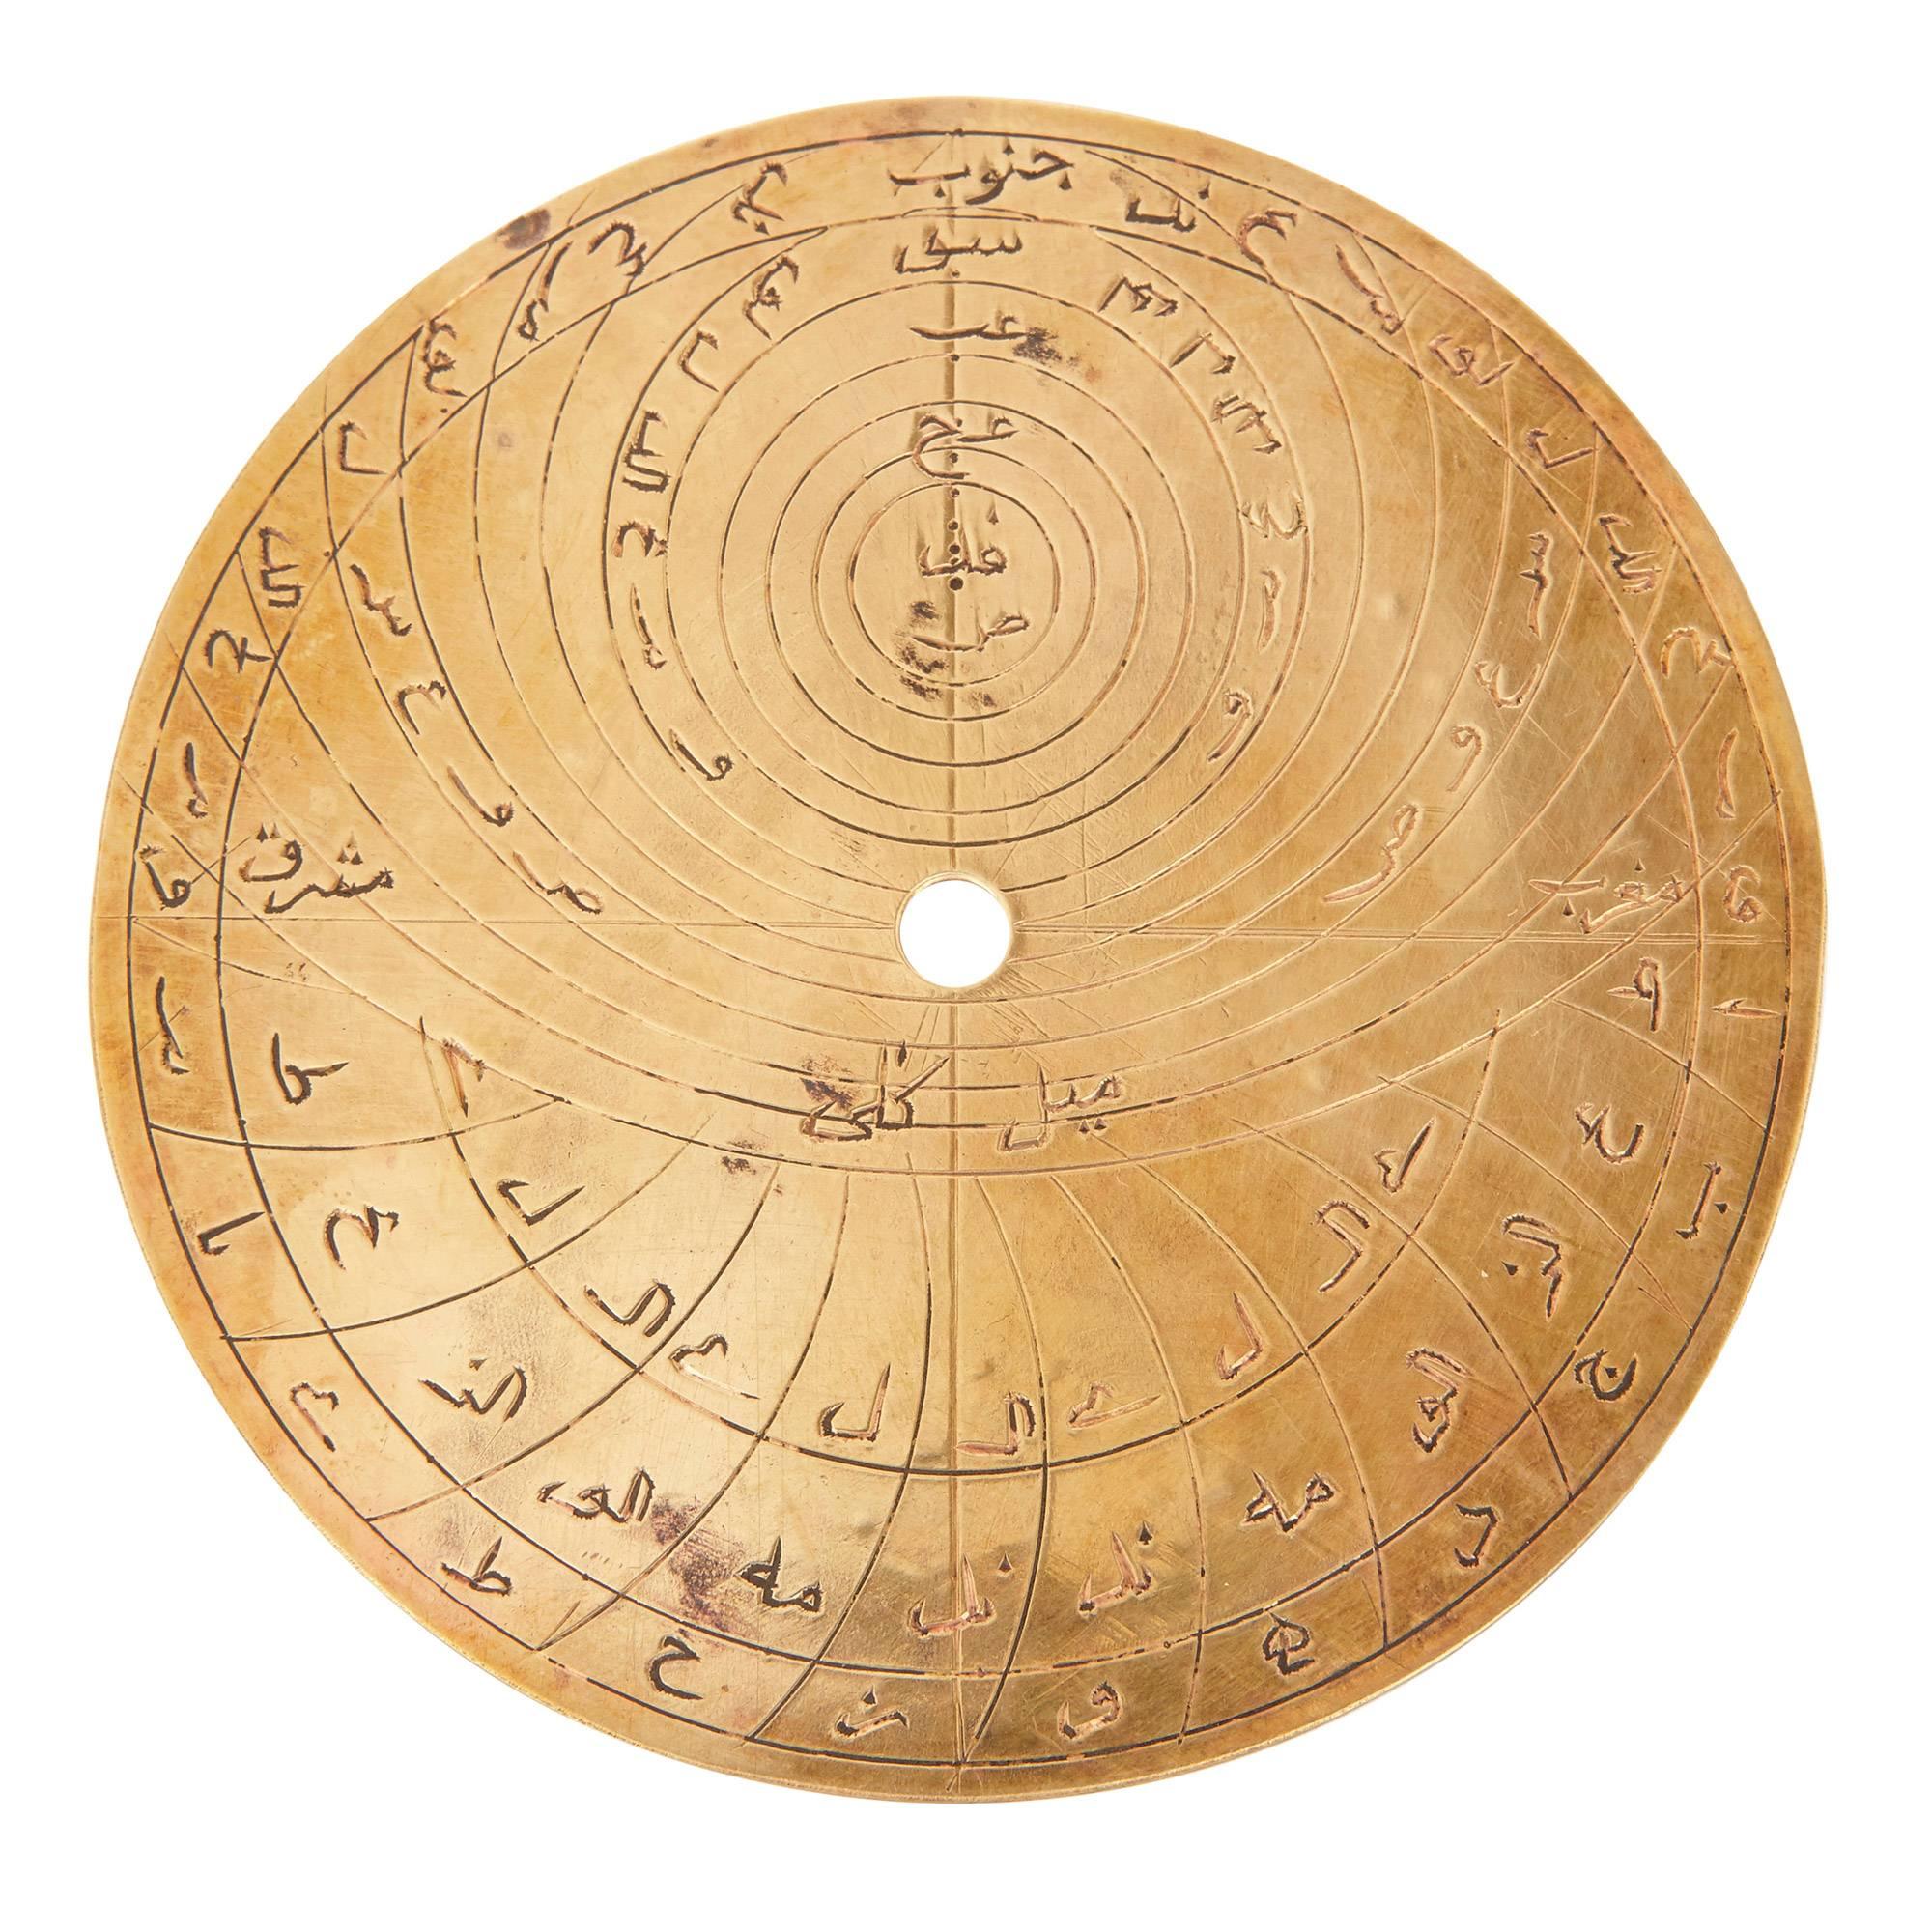 what art style is this an example of calligraphy astrolabe arabesque mosaic